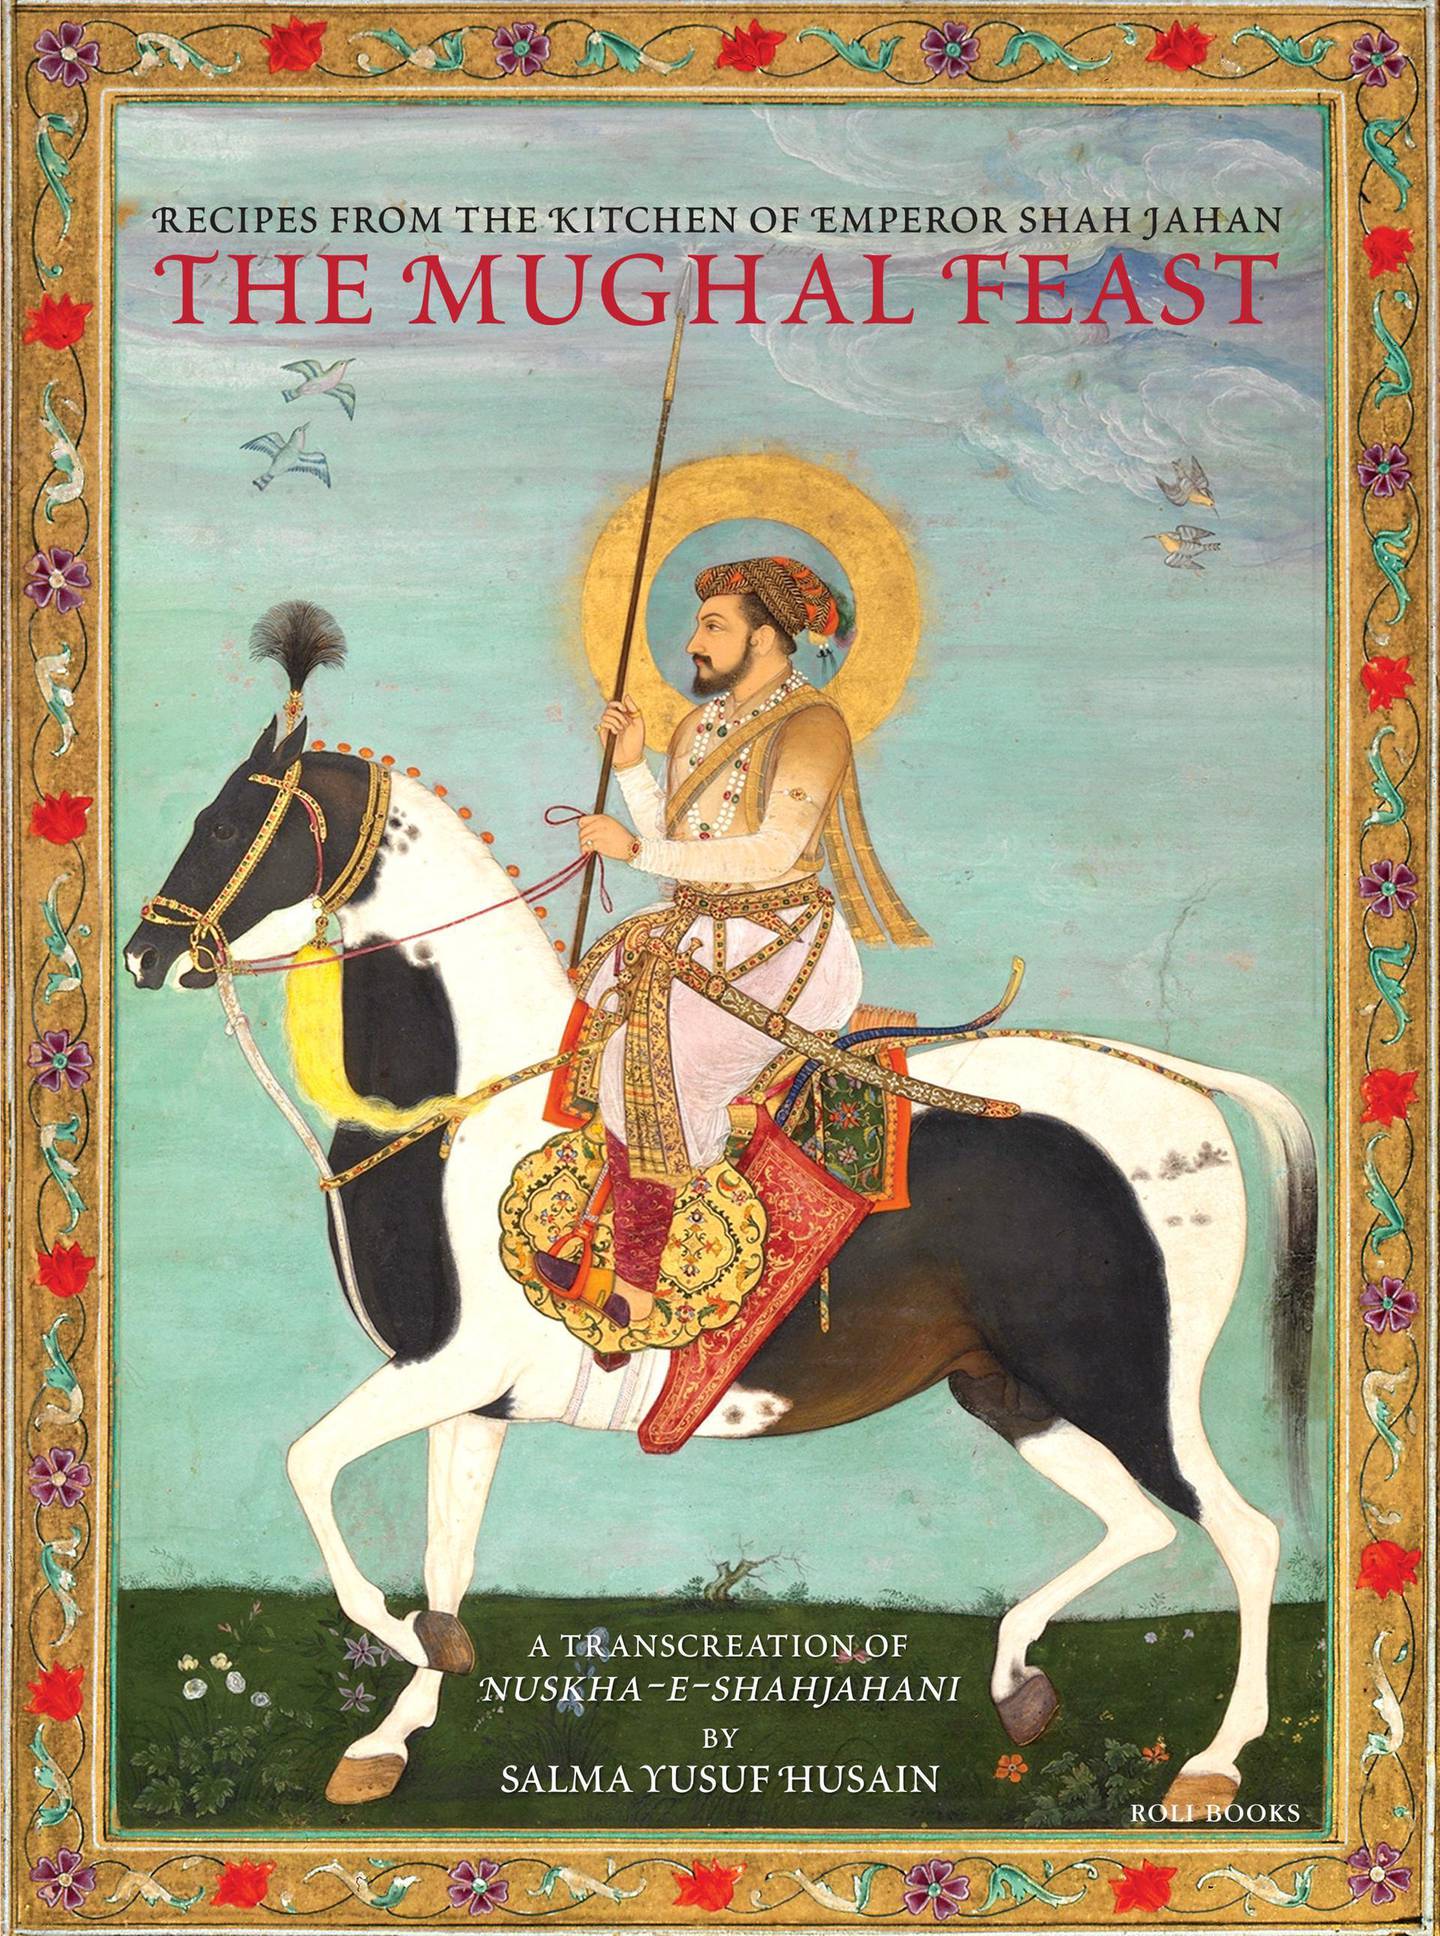 The Mughal Feast': unravelling the mysterious history of the emperors' cuisine